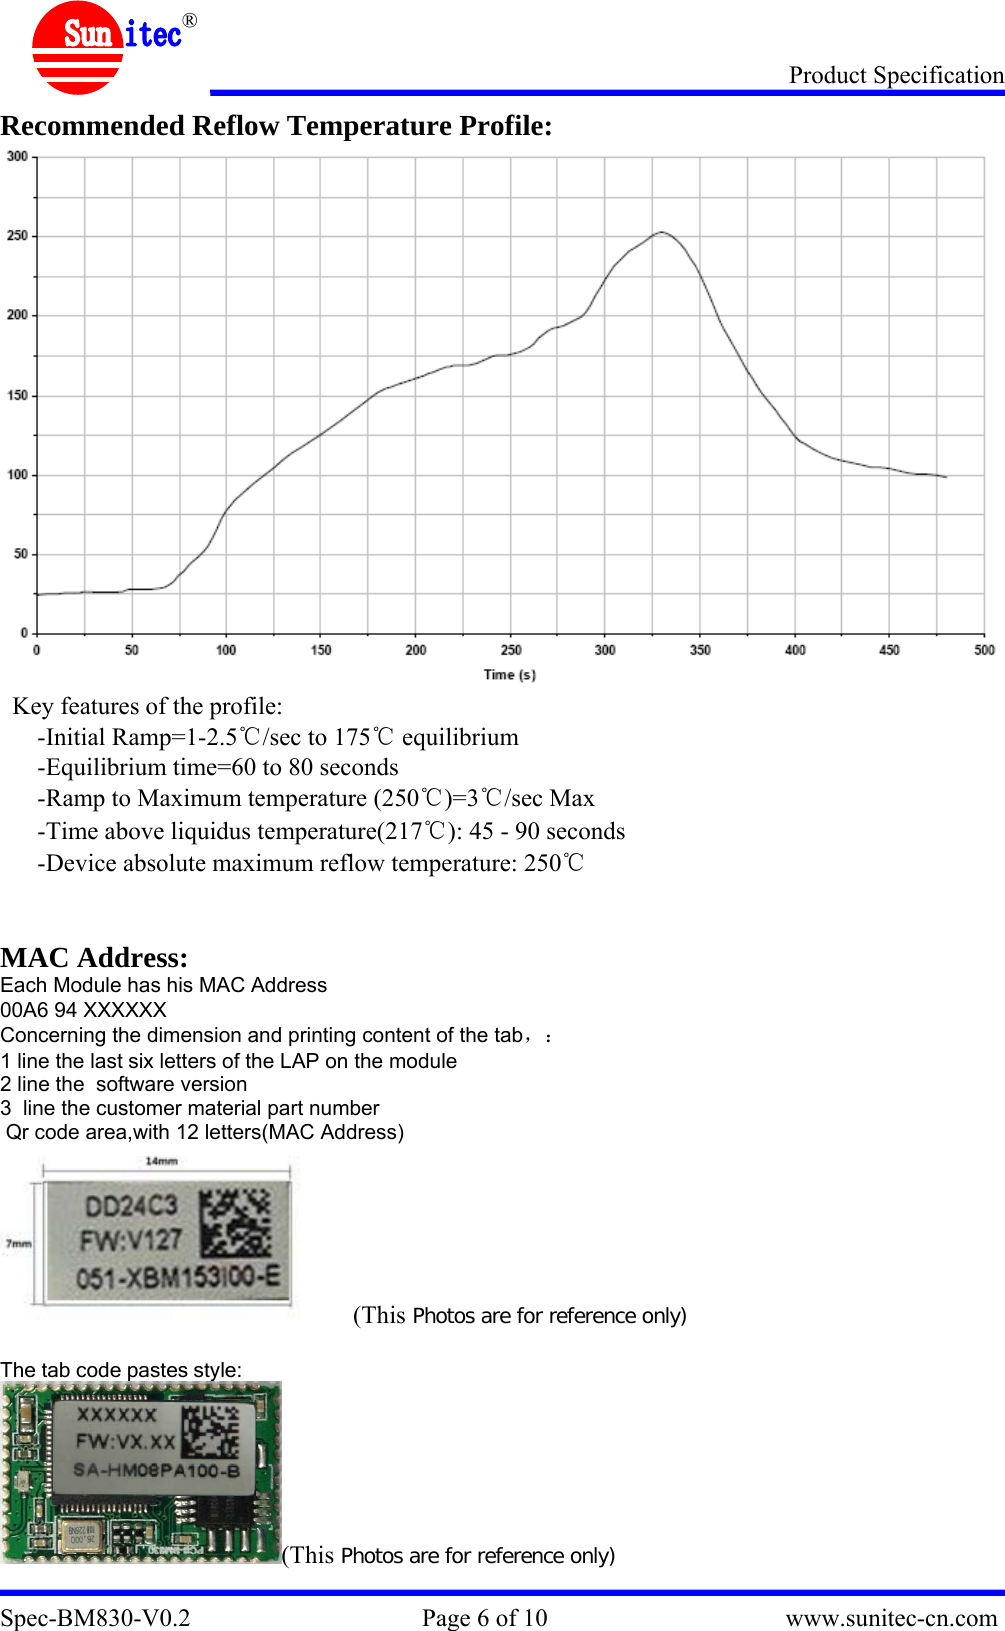 Product Specification Spec-BM830-V0.2                                     Page 6 of 10                                      www.sunitec-cn.com  ® Recommended Reflow Temperature Profile:  Key features of the profile: -Initial Ramp=1-2.5℃/sec to 175℃ equilibrium -Equilibrium time=60 to 80 seconds -Ramp to Maximum temperature (250℃)=3℃/sec Max -Time above liquidus temperature(217℃): 45 - 90 seconds -Device absolute maximum reflow temperature: 250℃   MAC Address: Each Module has his MAC Address 00A6 94 XXXXXX Concerning the dimension and printing content of the tab，： 1 line the last six letters of the LAP on the module 2 line the  software version 3  line the customer material part number  Qr code area,with 12 letters(MAC Address)       (This Photos are for reference only)  The tab code pastes style: (This Photos are for reference only) 